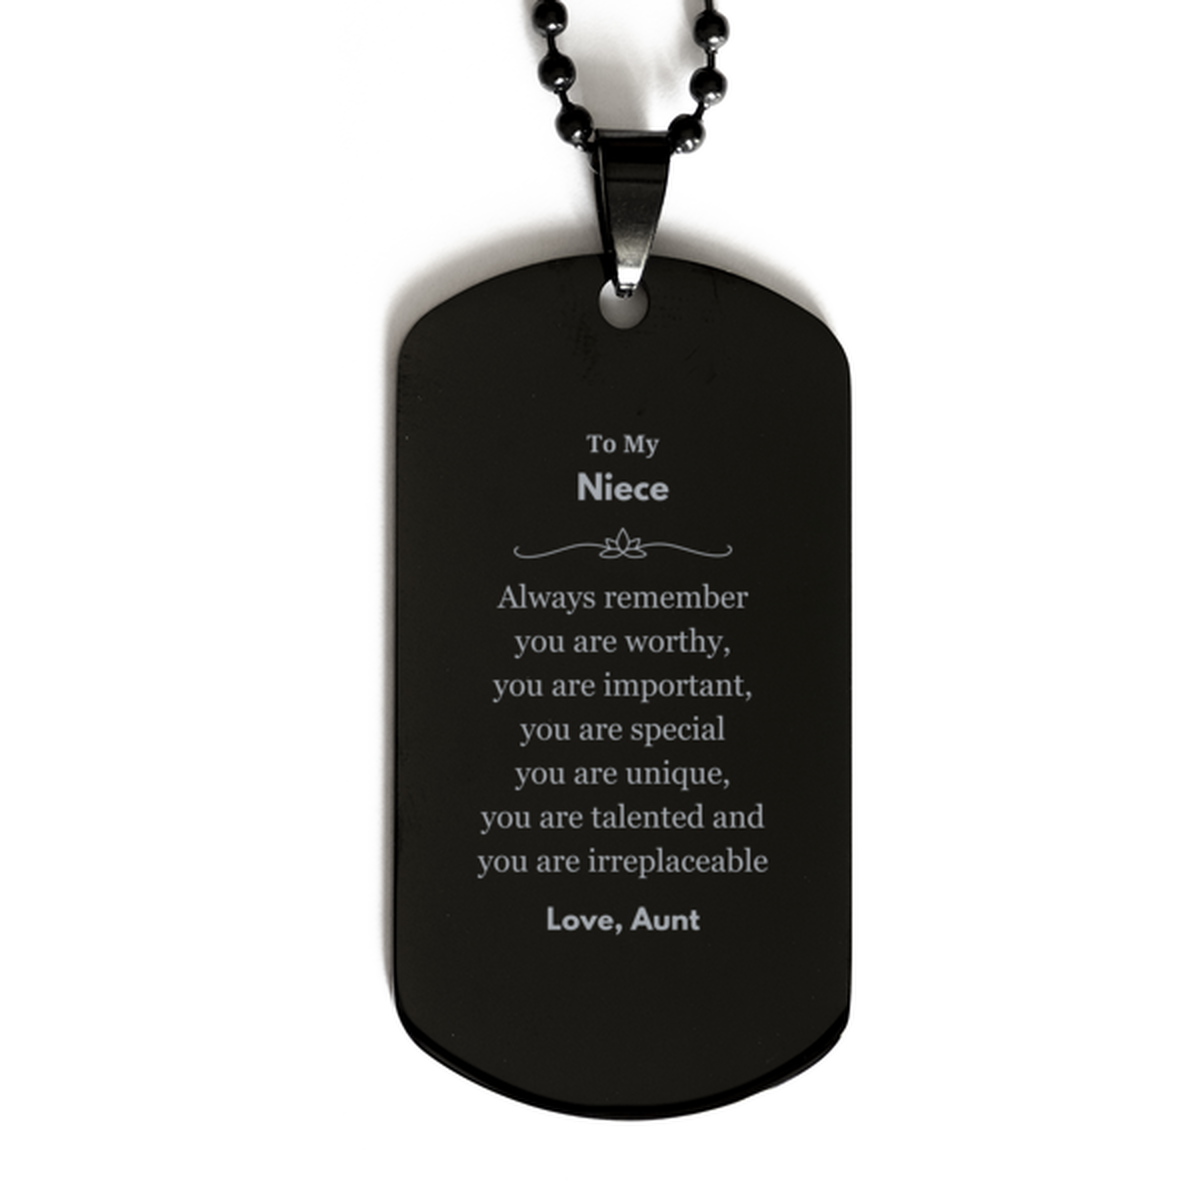 Niece Birthday Gifts from Aunt, Inspirational Black Dog Tag for Niece Christmas Graduation Gifts for Niece Always remember you are worthy, you are important. Love, Aunt